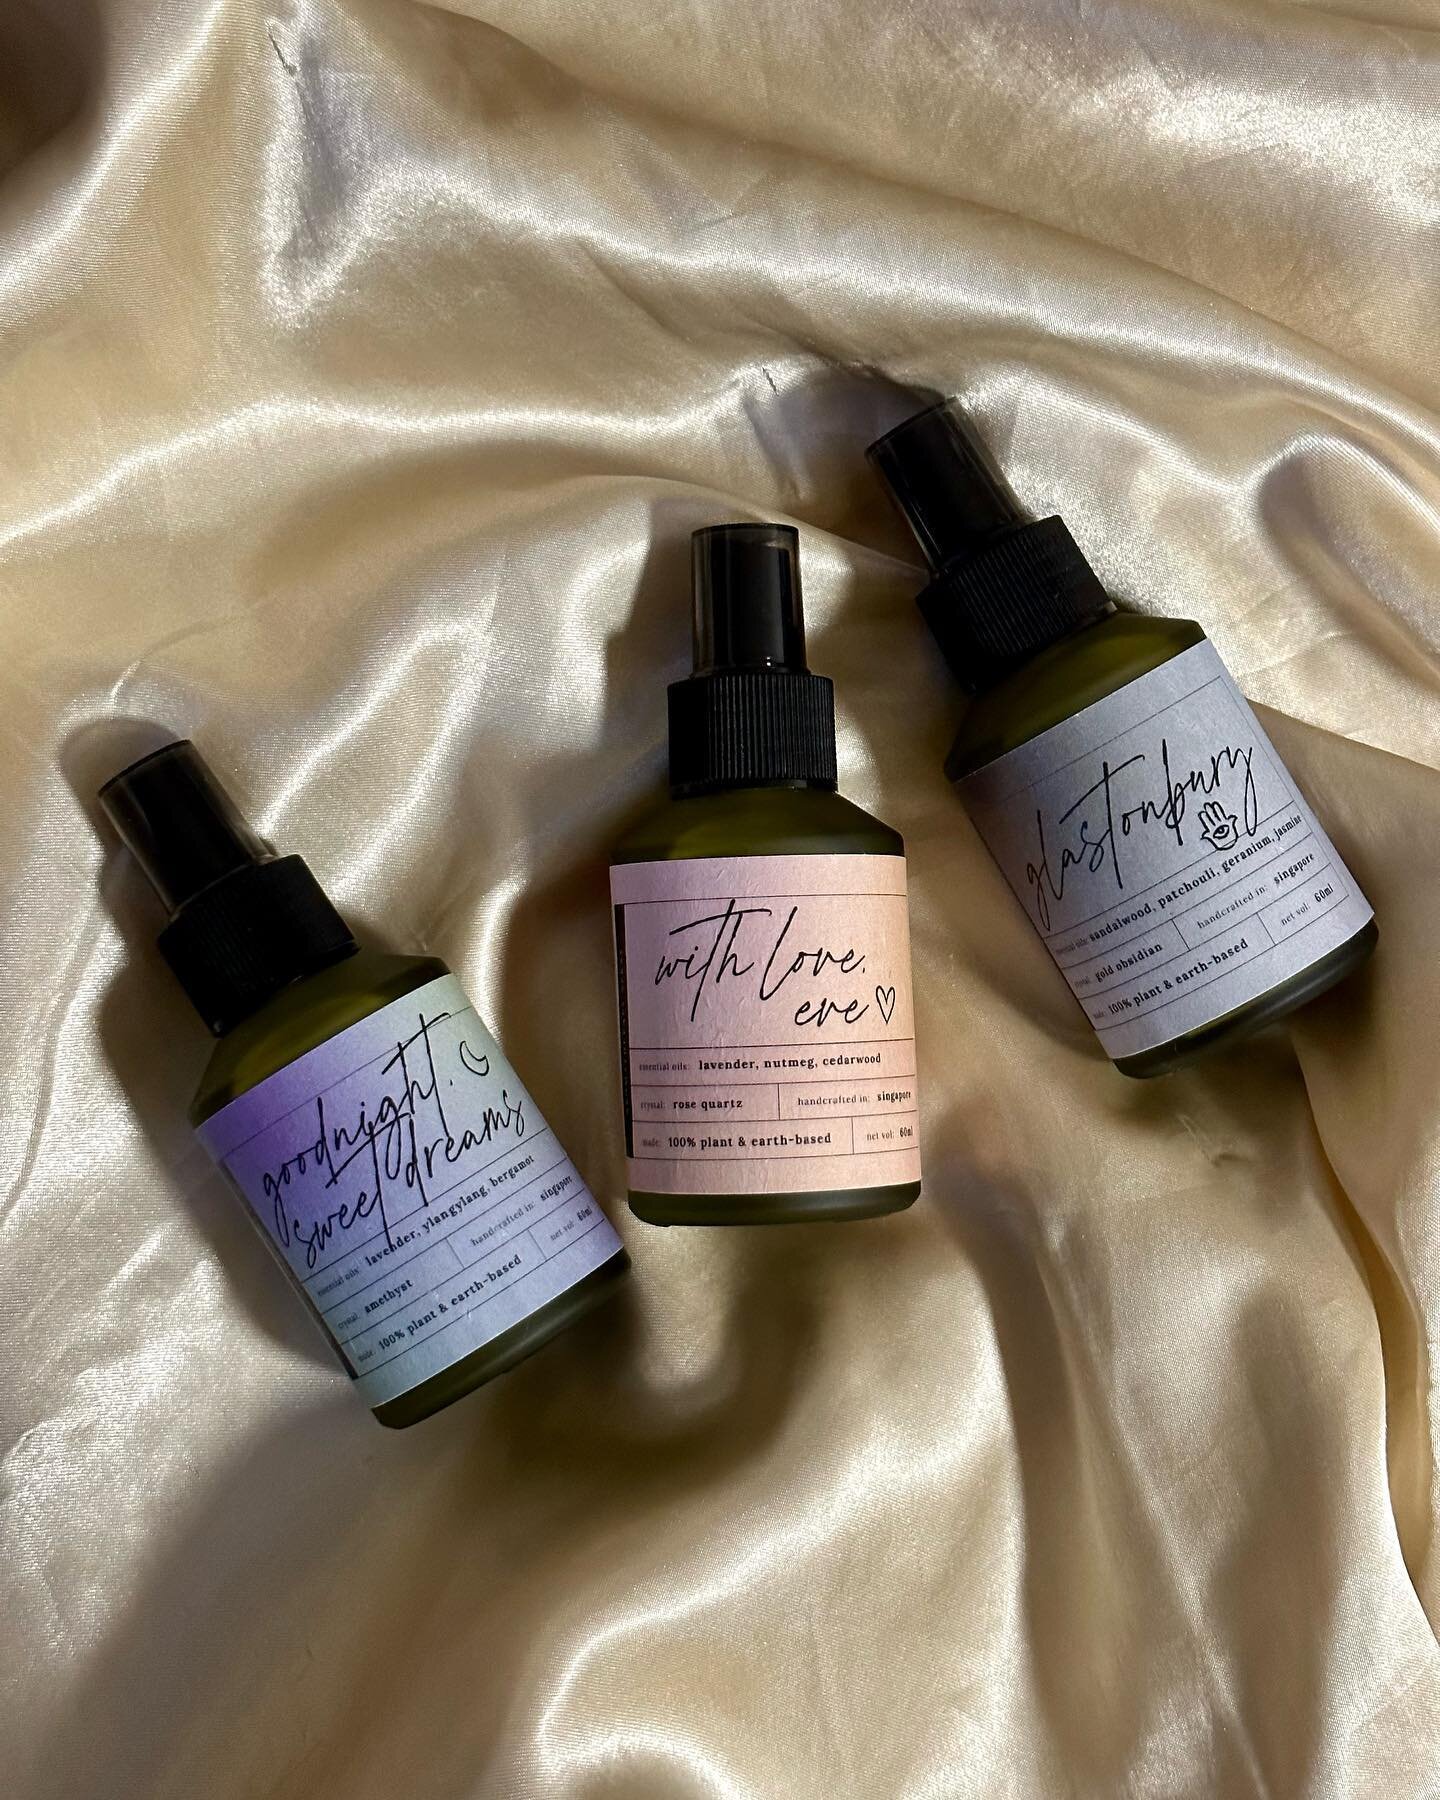 Made with all-natural plant-derived ingredients, our essential oil aromatherapy spray is safe and easy to use. Simply spray in the air or on linens to enjoy the rejuvenating benefits of aromatherapy.

Treat yourself to the ultimate aromatherapy exper